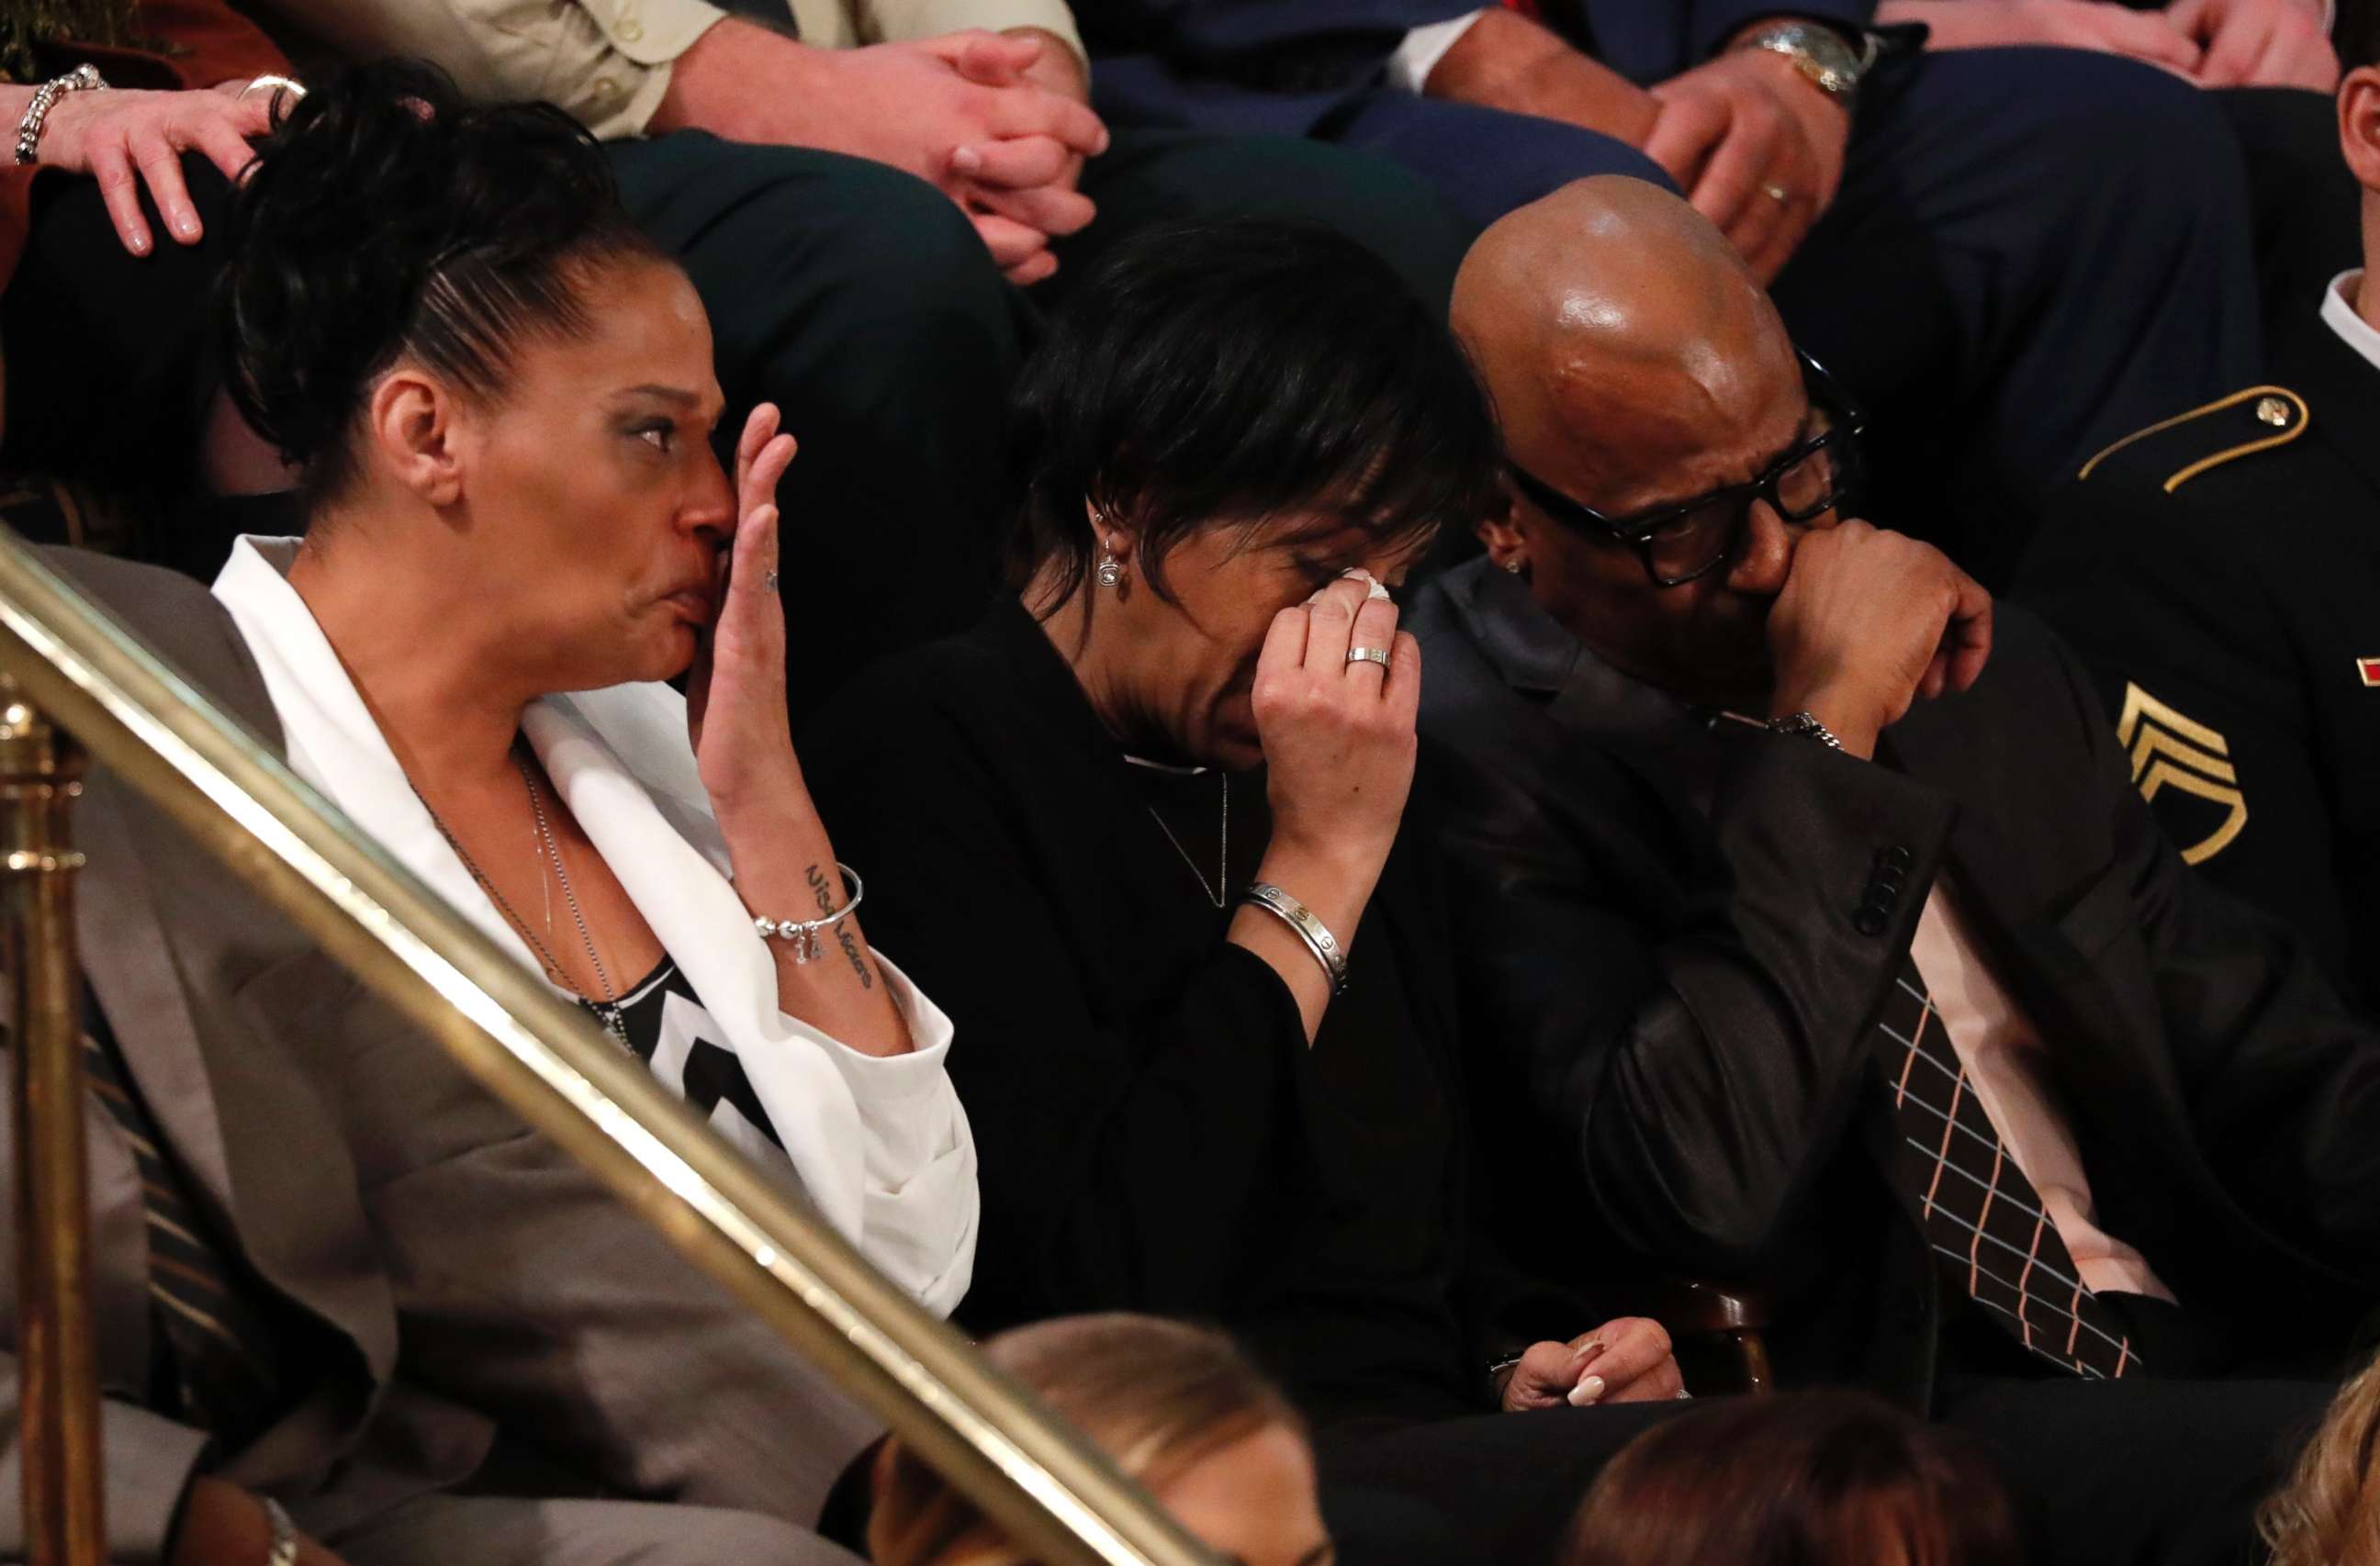 PHOTO: The parents of two girls whose murders have been attributed to MS-13, cry as U.S. President Donald Trump introduces them during his State of the Union address in Washington, Jan. 30, 2018.